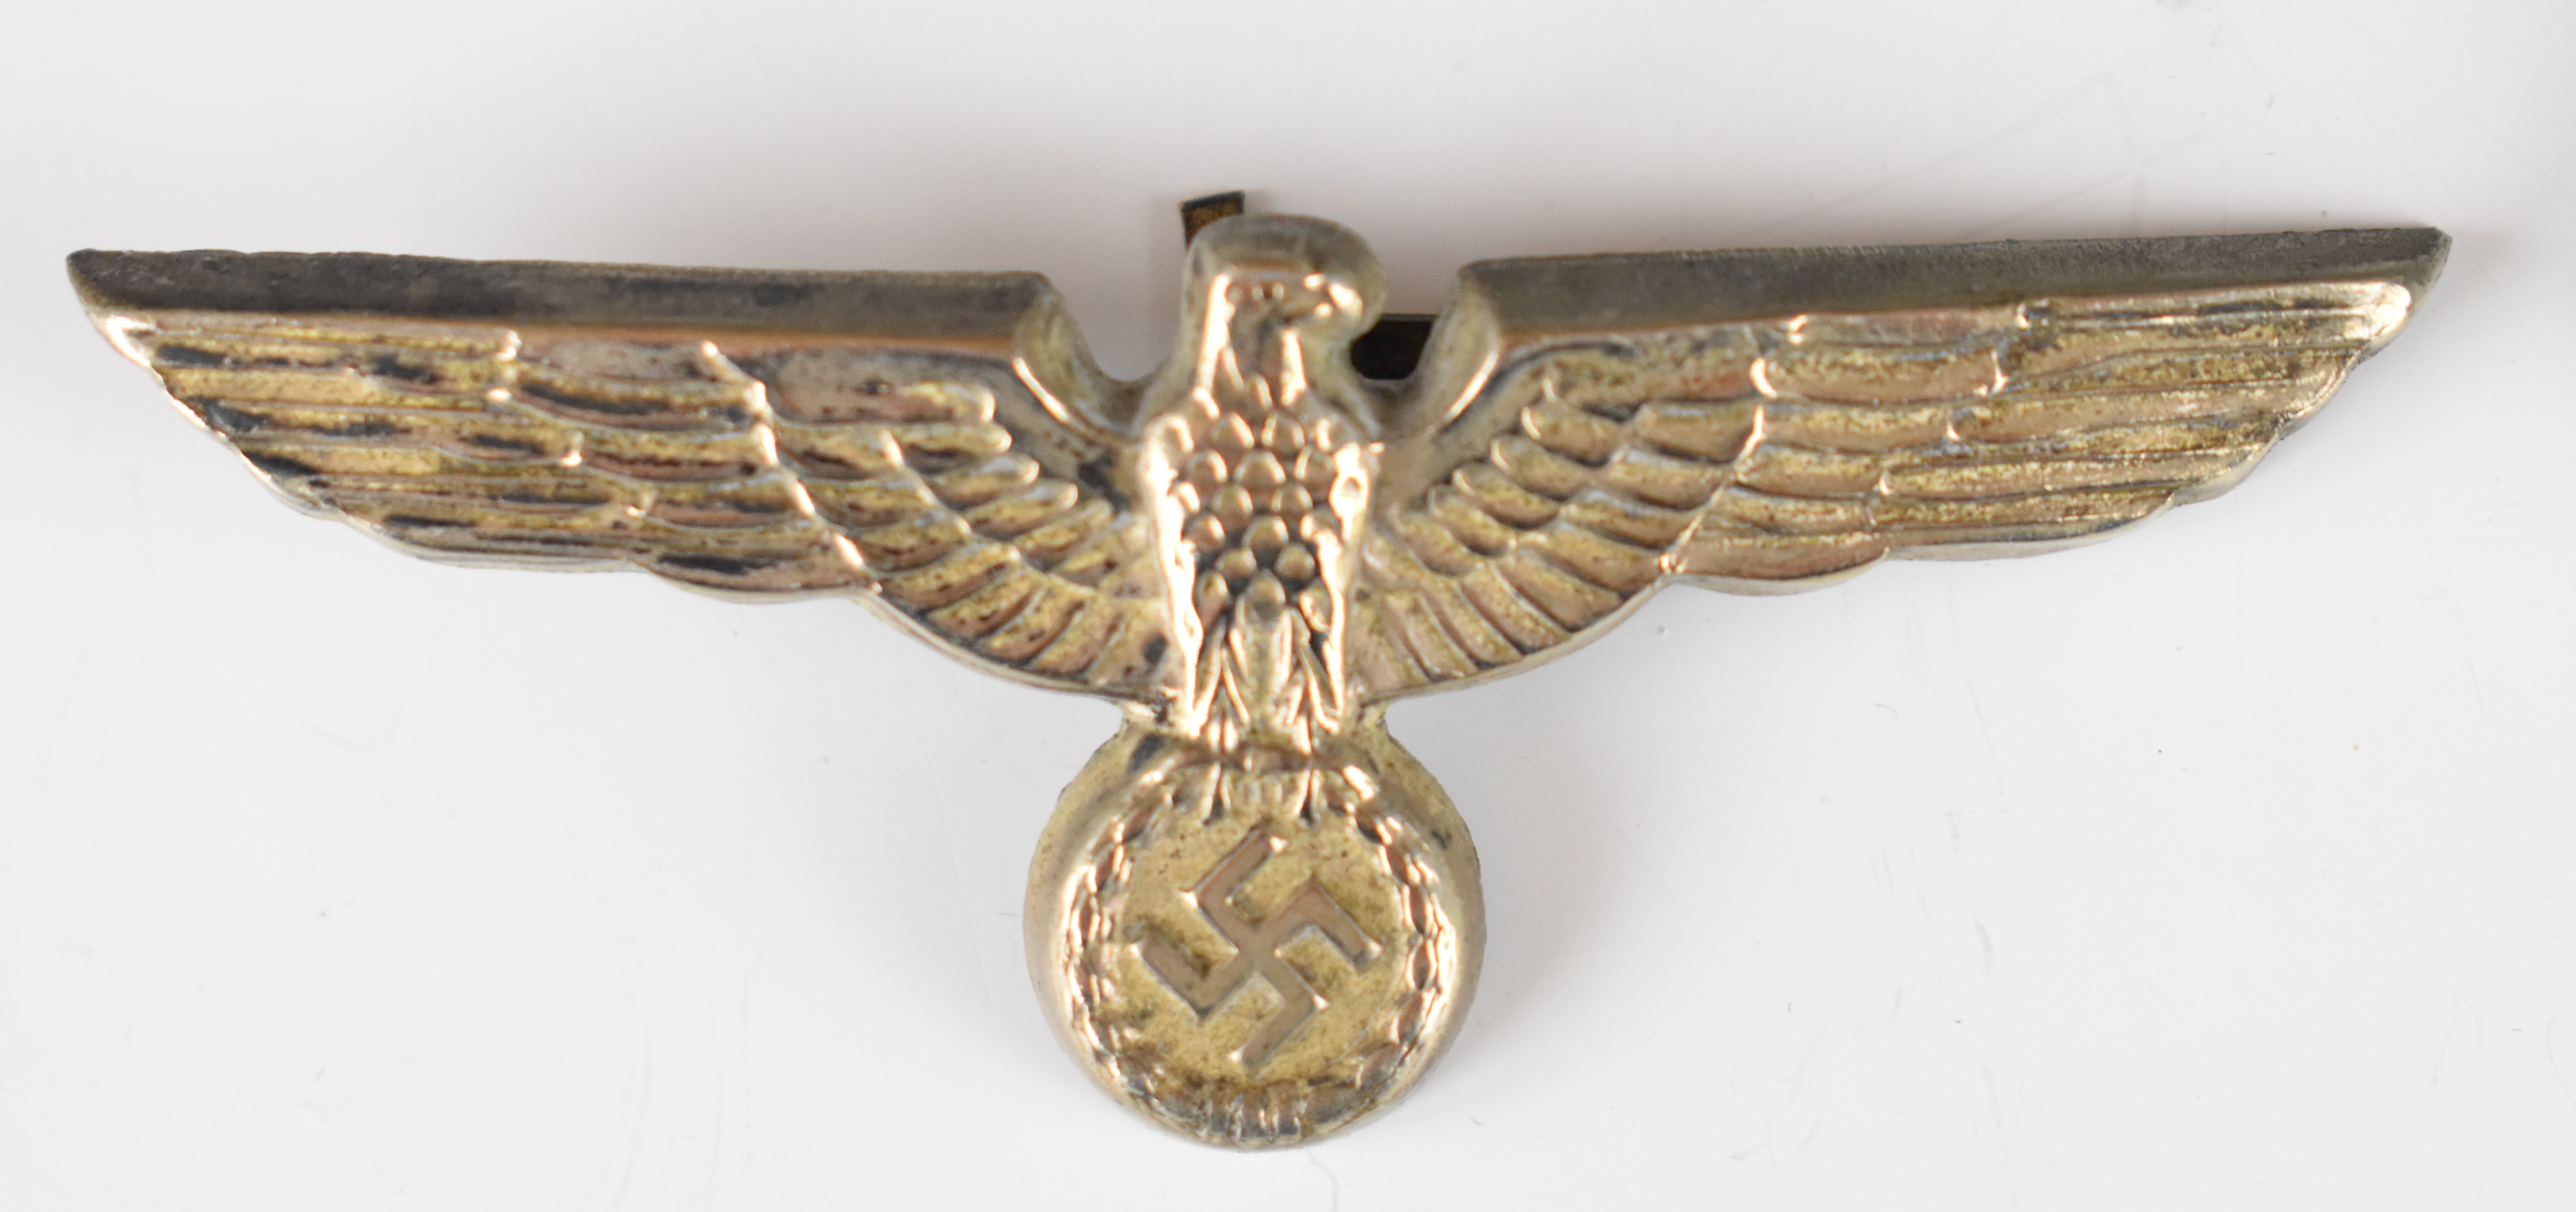 Three German WW2 Nazi Third Reich Eagle badges including a cloth example - Image 2 of 3